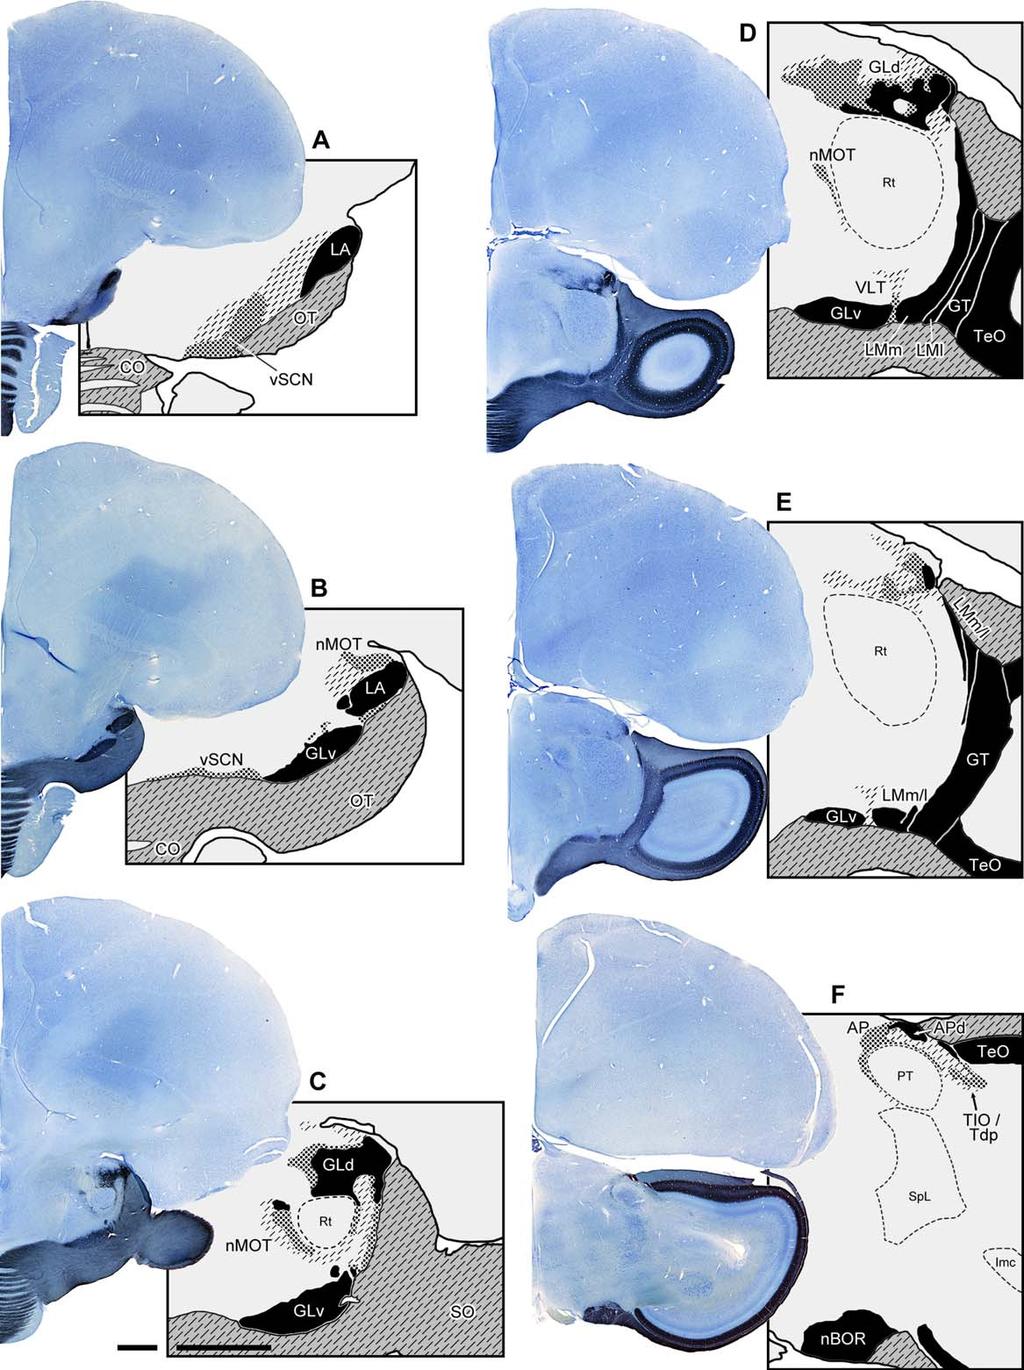 Q. Krabichler et al. Figure 7. Overview of the retinal projections to central targets in the brain.